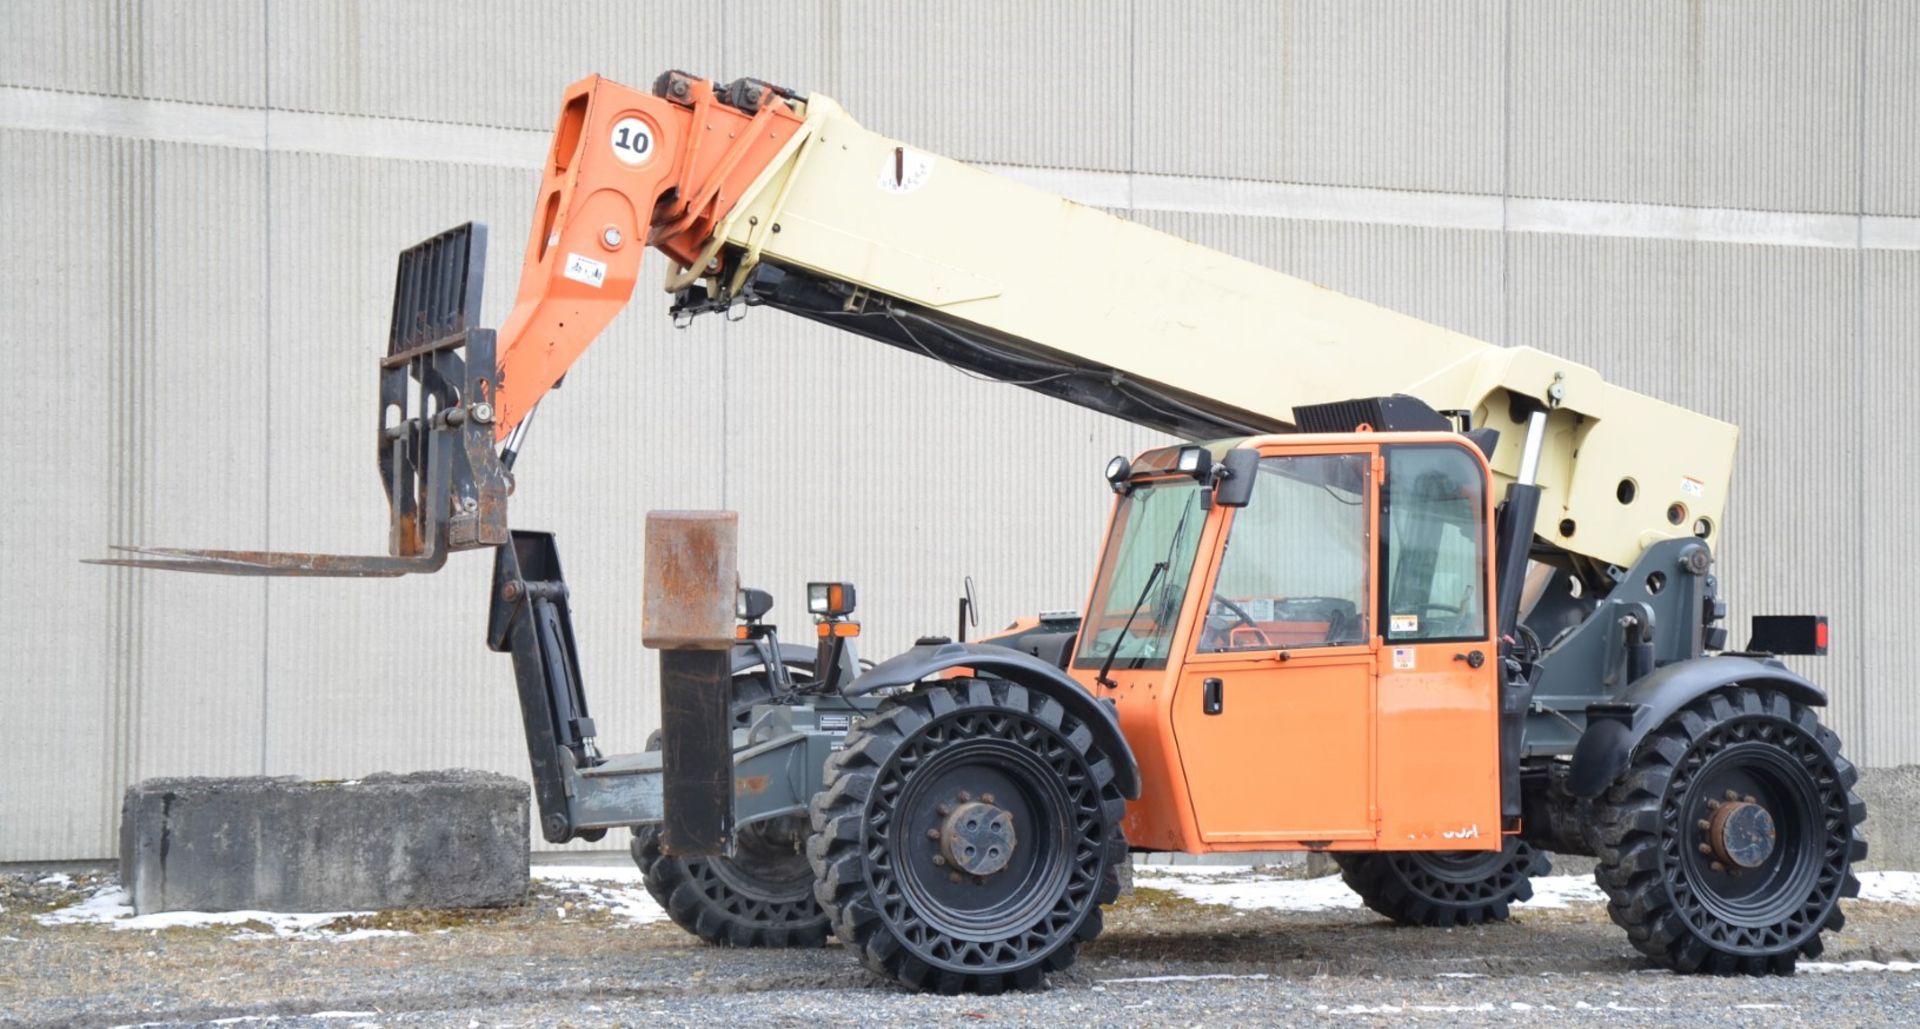 JLG (2011) G10-55A 10,000 LBS. CAPACITY DIESEL TELEHANDLER FORKLIFT WITH 56' MAX VERTICAL LIFT, - Image 5 of 23